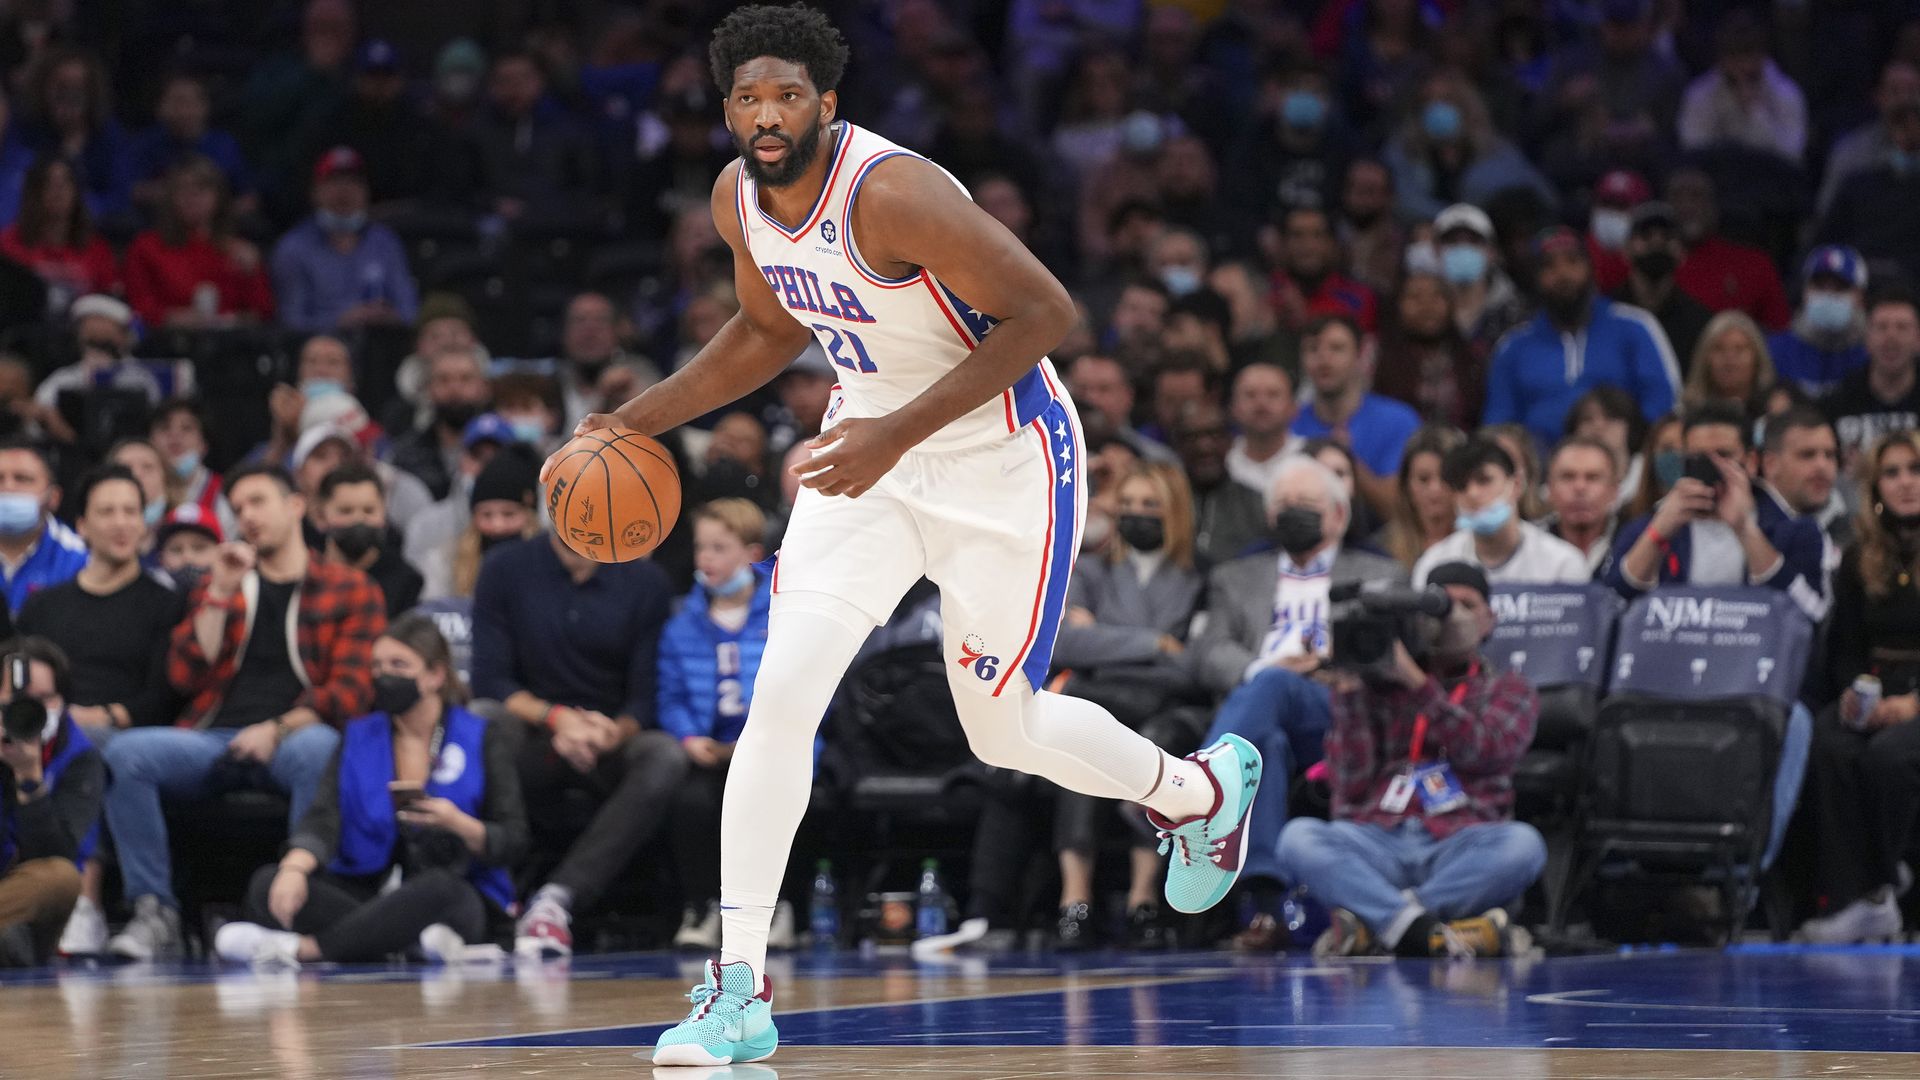 Joel Embiid of the 76ers dribbles the ball against the Minnesota Timberwolves 